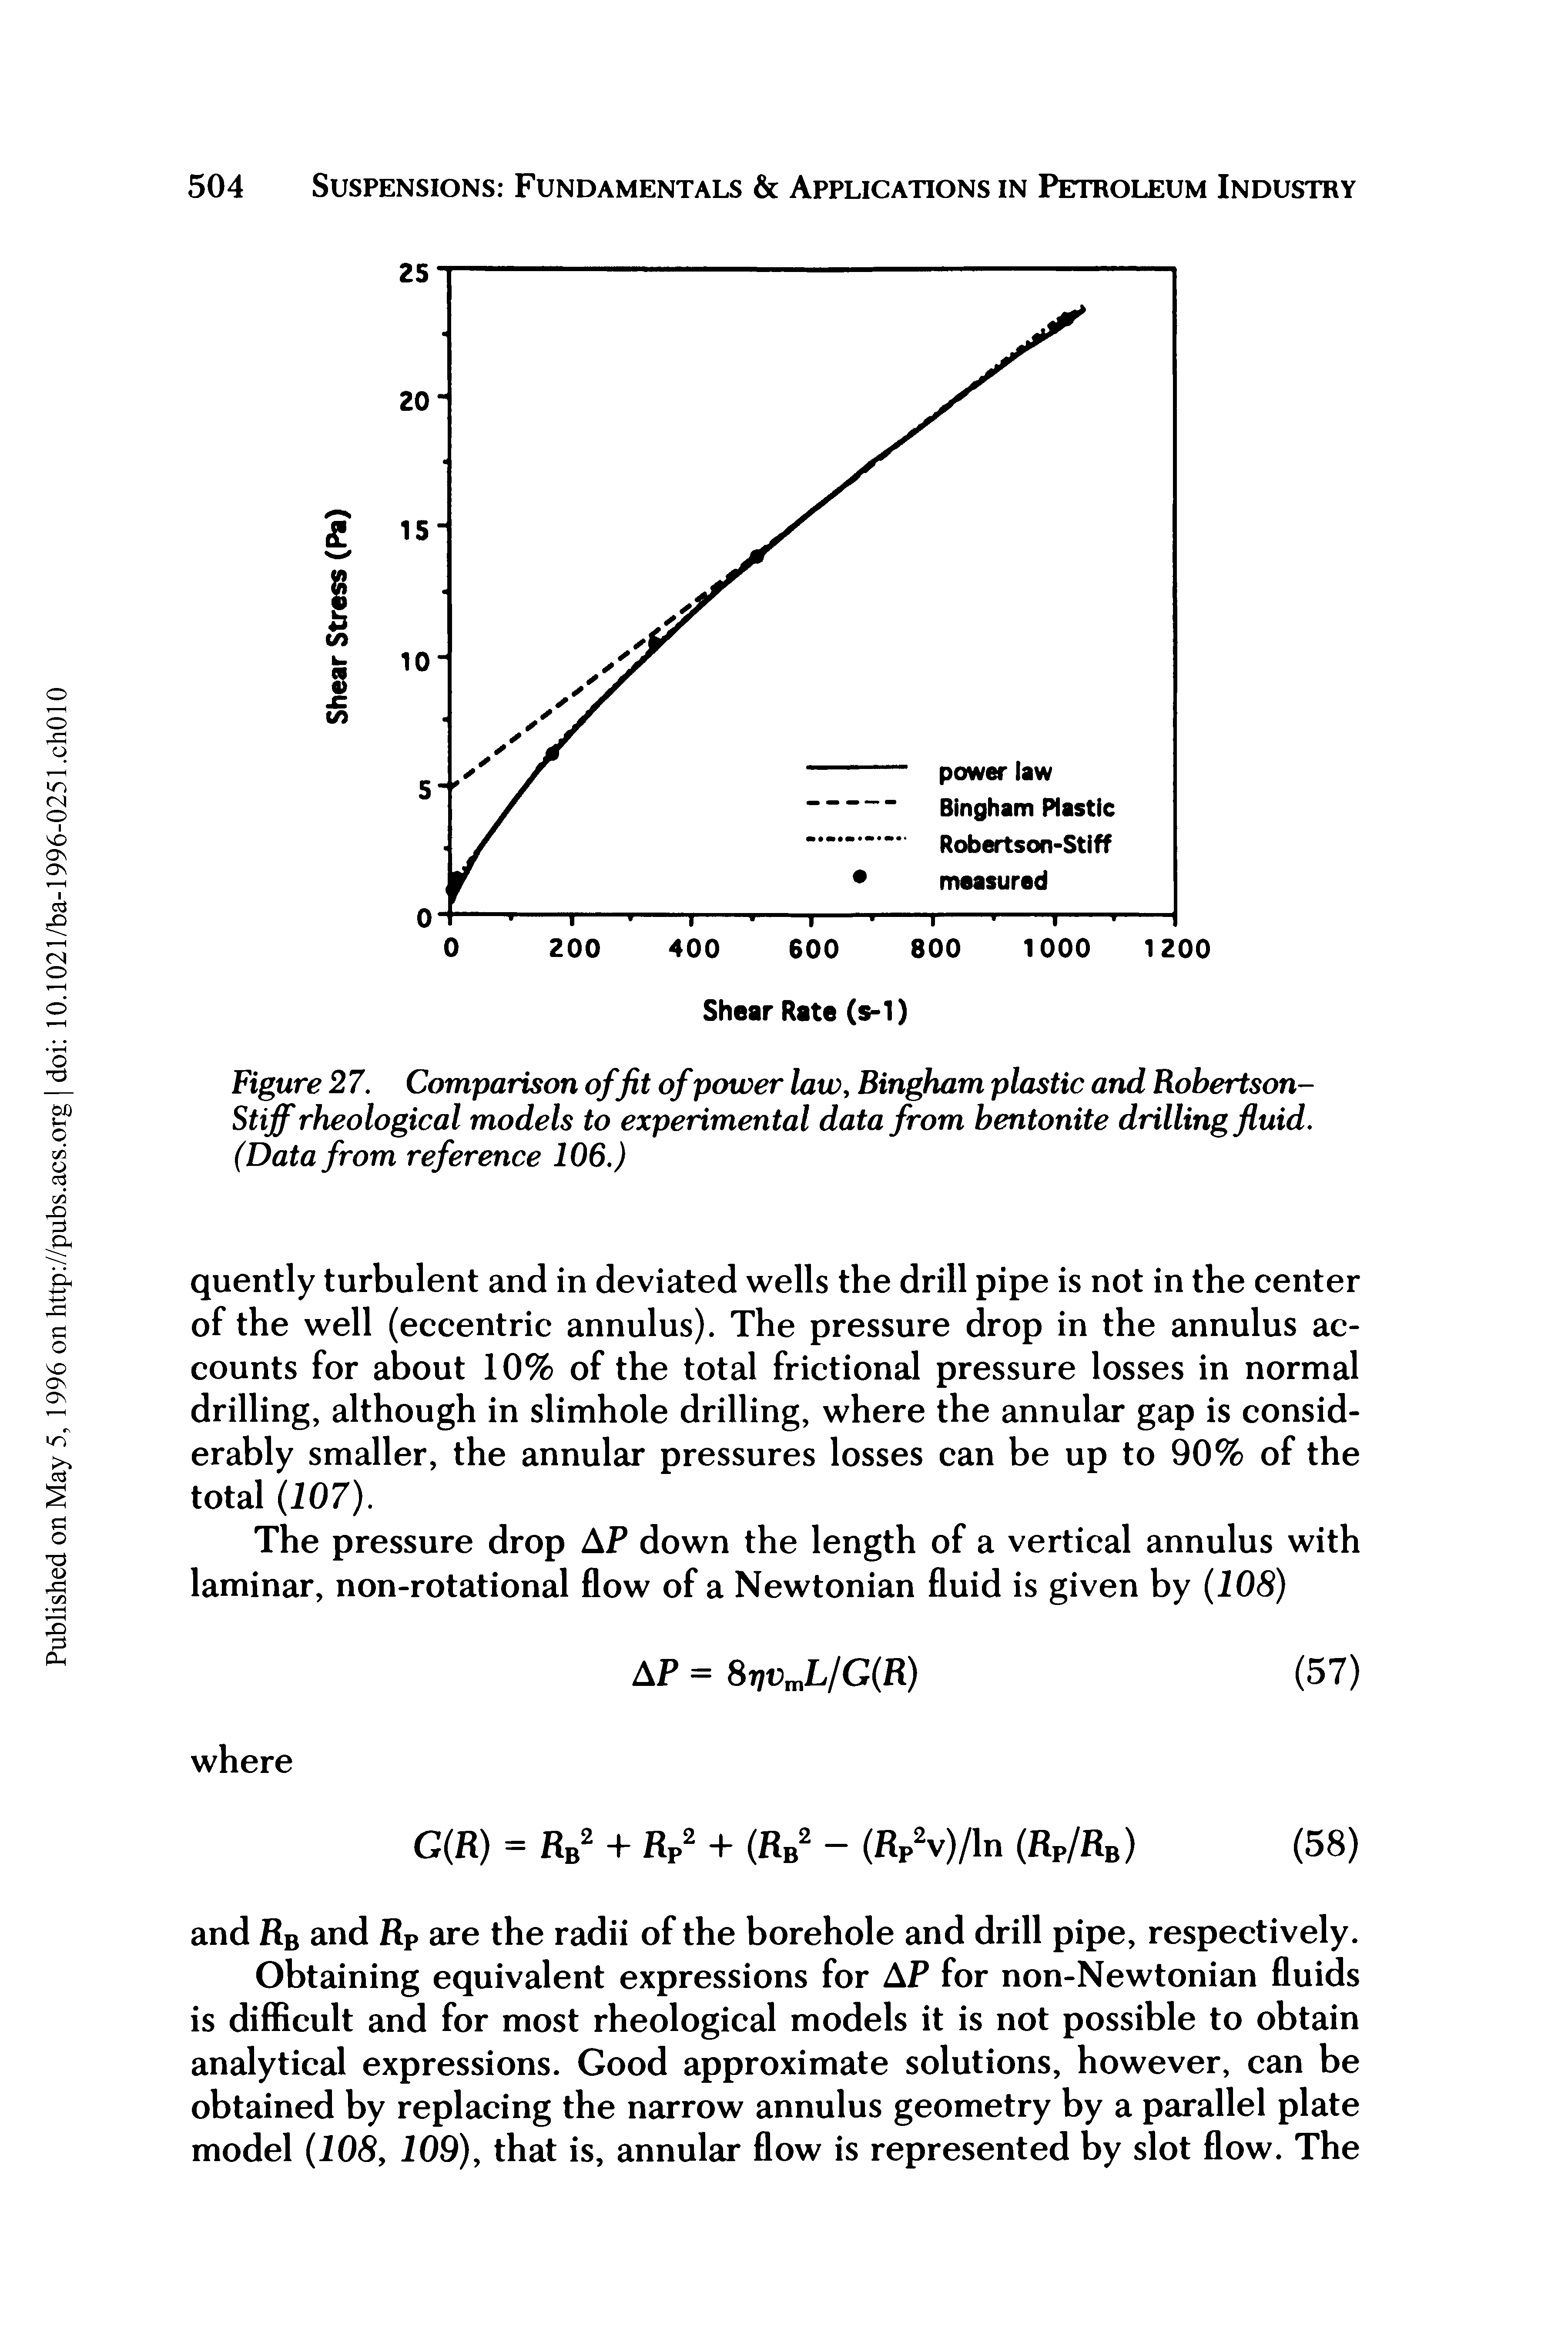 Figure 2 7. Comparison of fit of power law, Bingham plastic and Robertson-Stiff rheological models to experimental data from bentonite drilling fluid. (Data from reference 106.)...